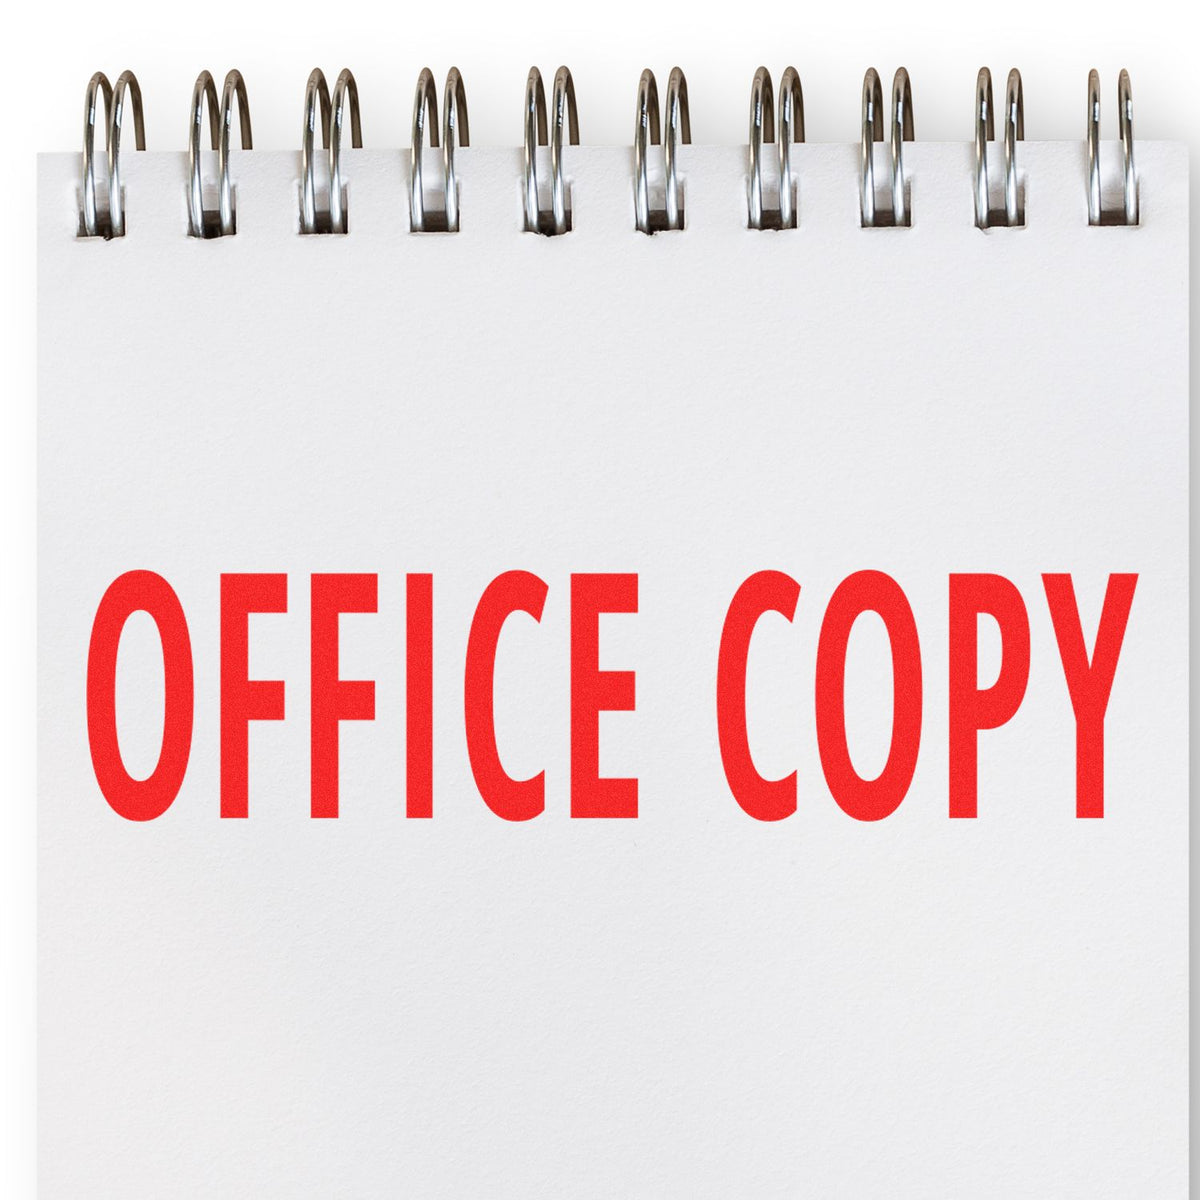 Office Copy Rubber Stamp In Use Photo